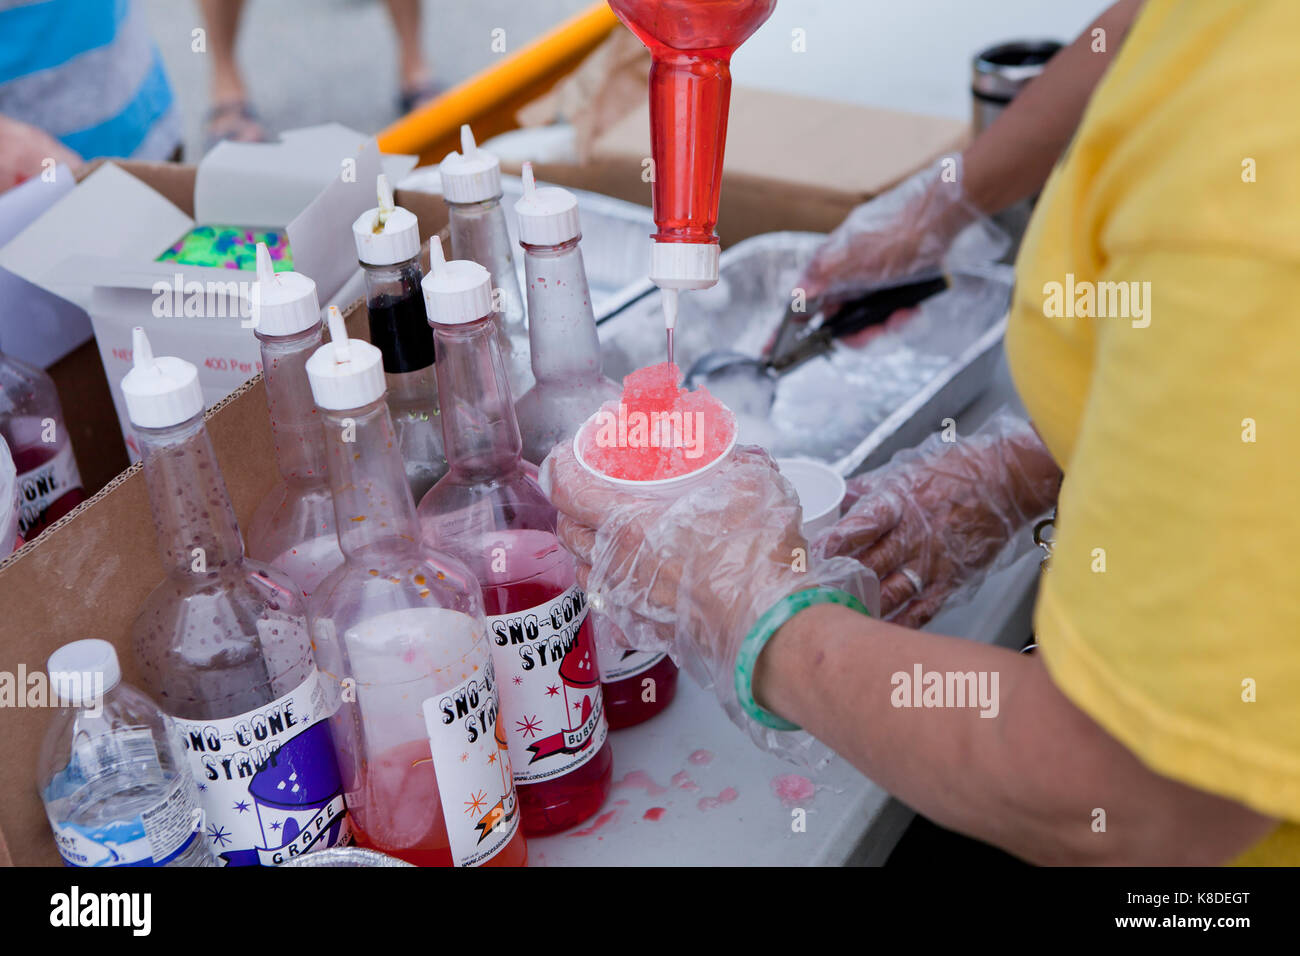 Snow cone (shaved ice) vendor dripping flavored sugar syrup - USA Stock Photo